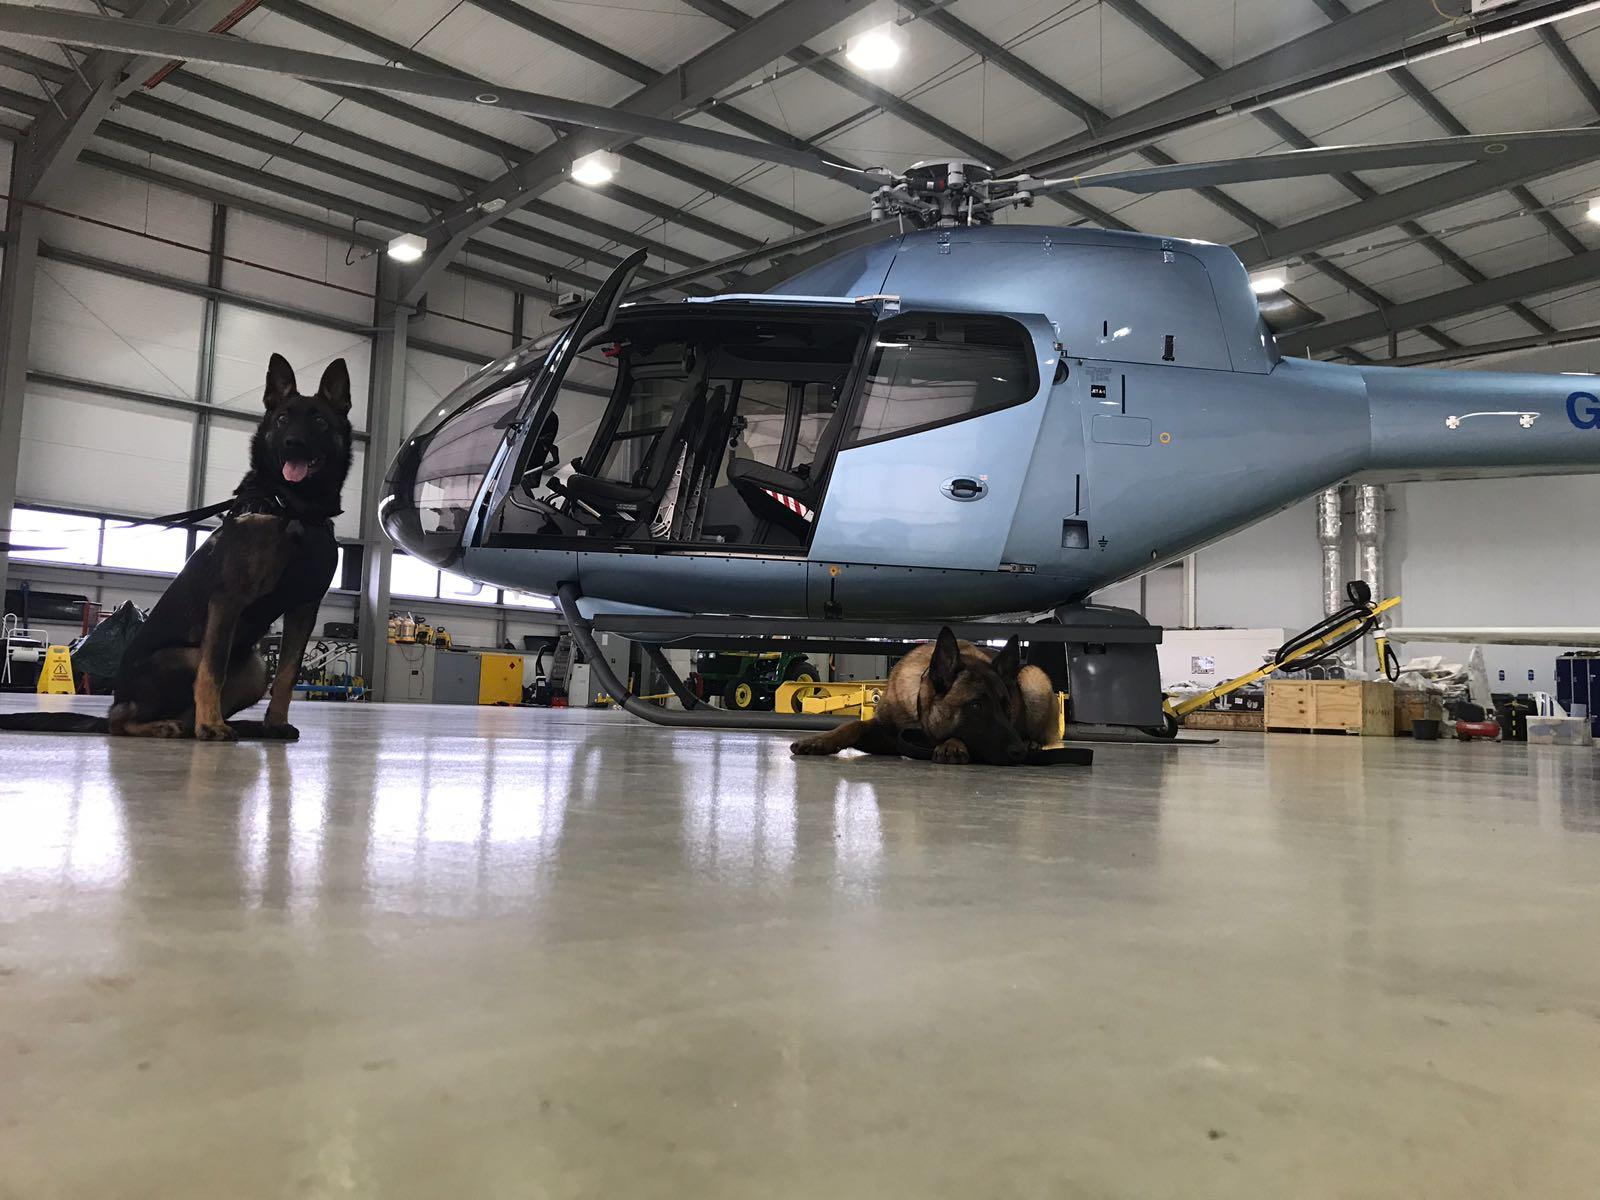 The NGOs Animals Saving Animals and Explorers Against Extinction have trained anti-poaching dogs at SaxonAir’s hangar, familiarizing the dogs with helicopters before they are sent on live missions.